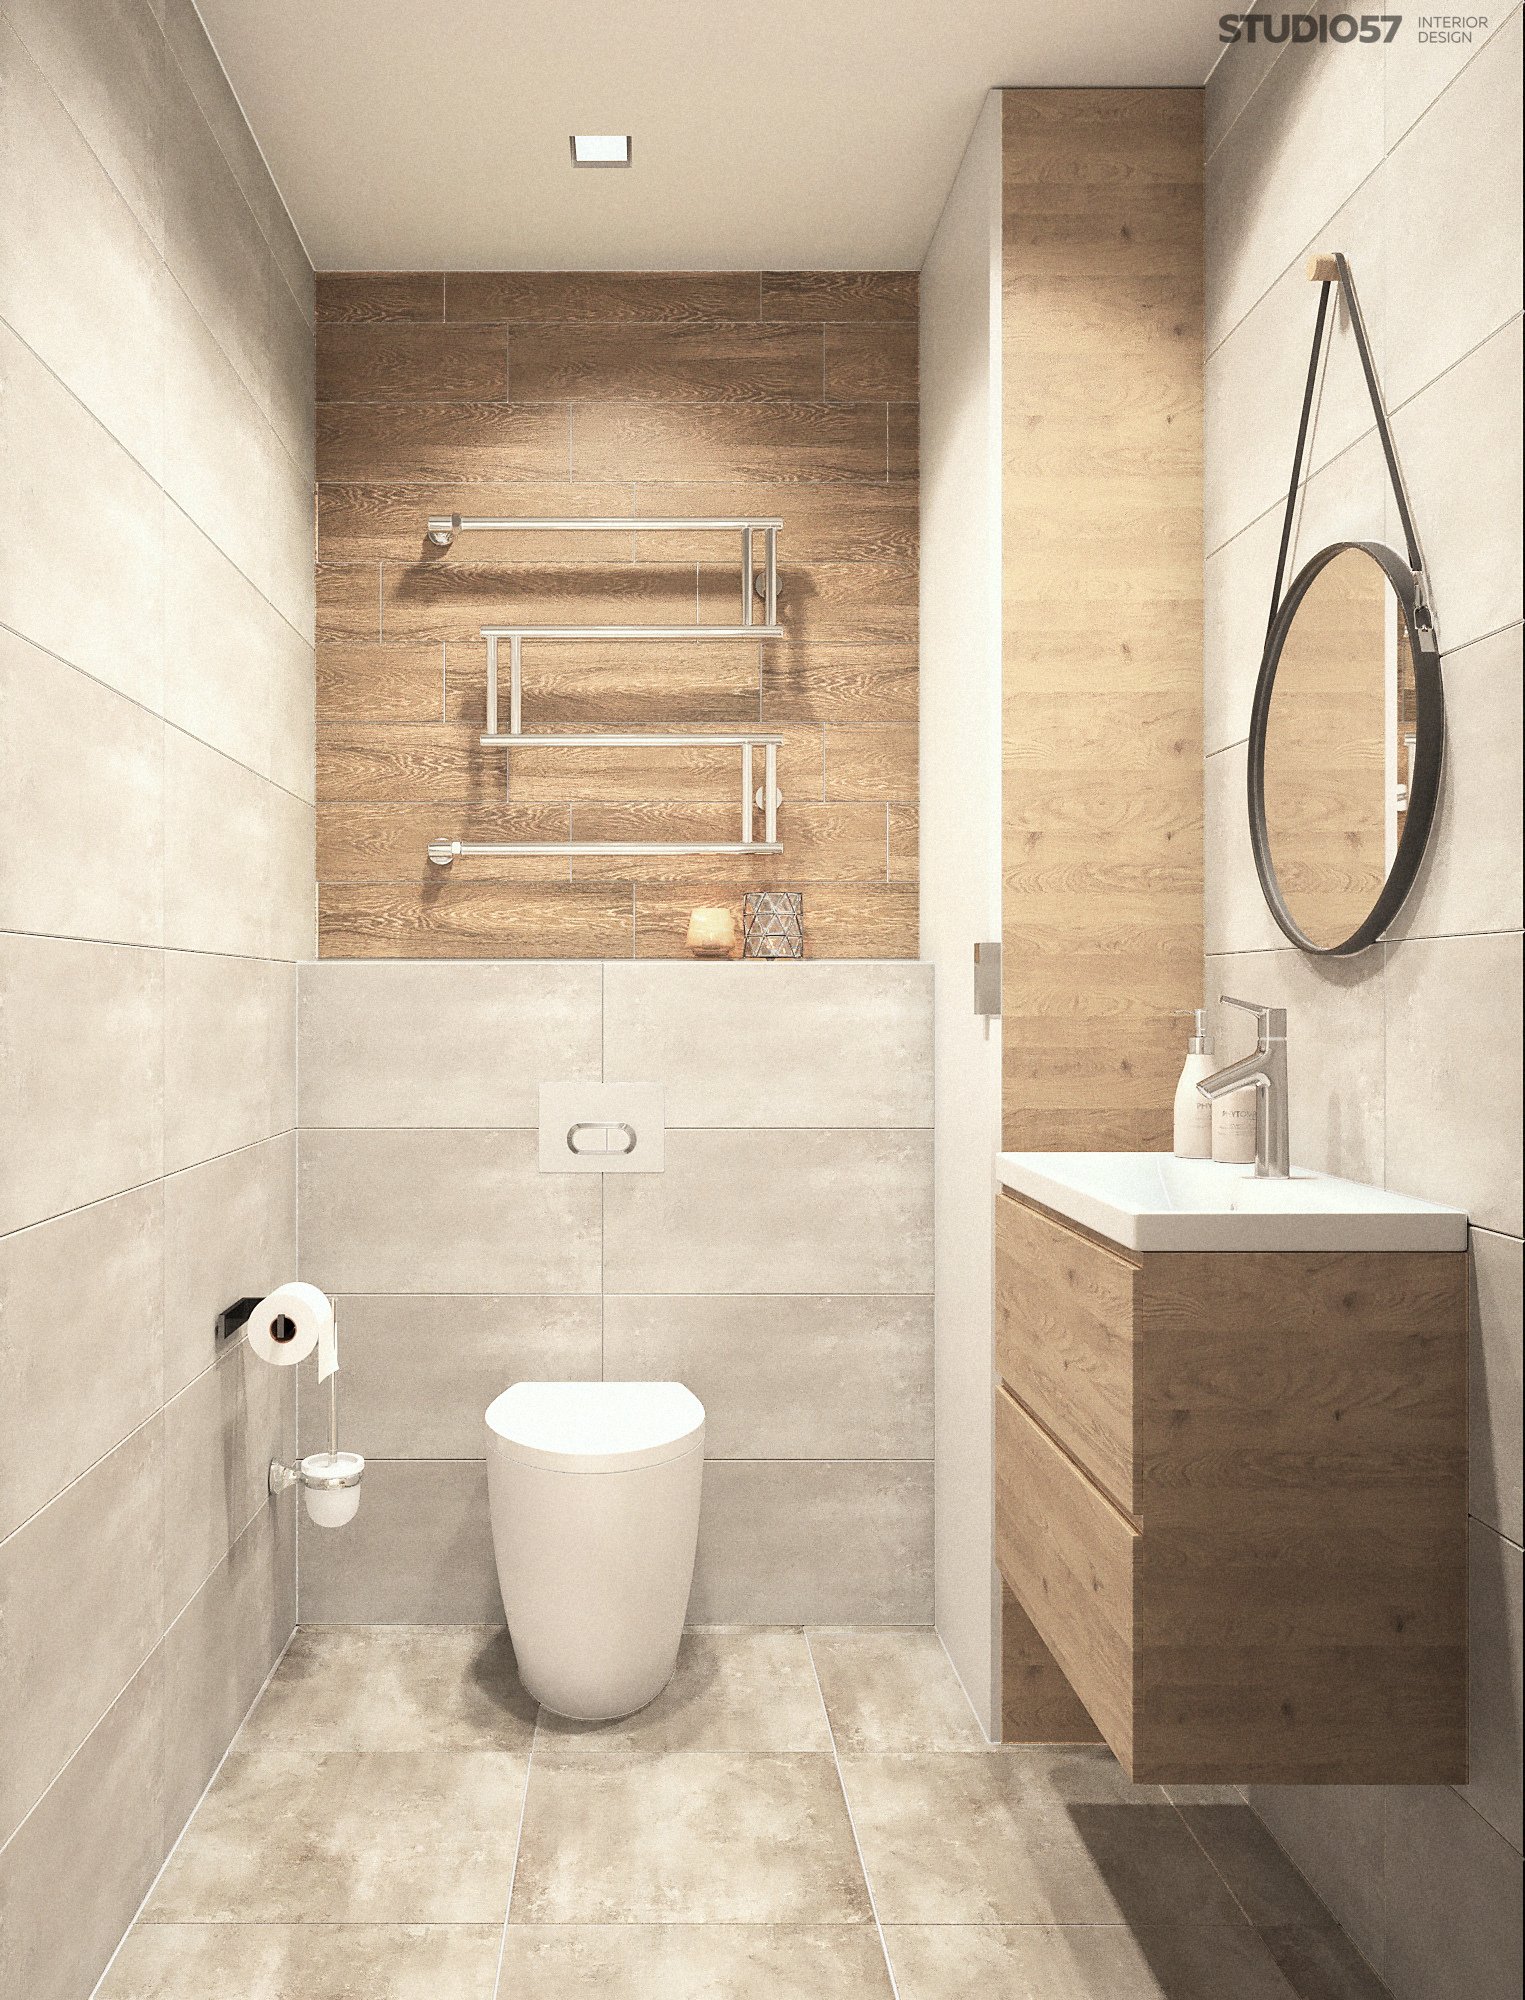 Design of a bathroom "tree finishing" picture